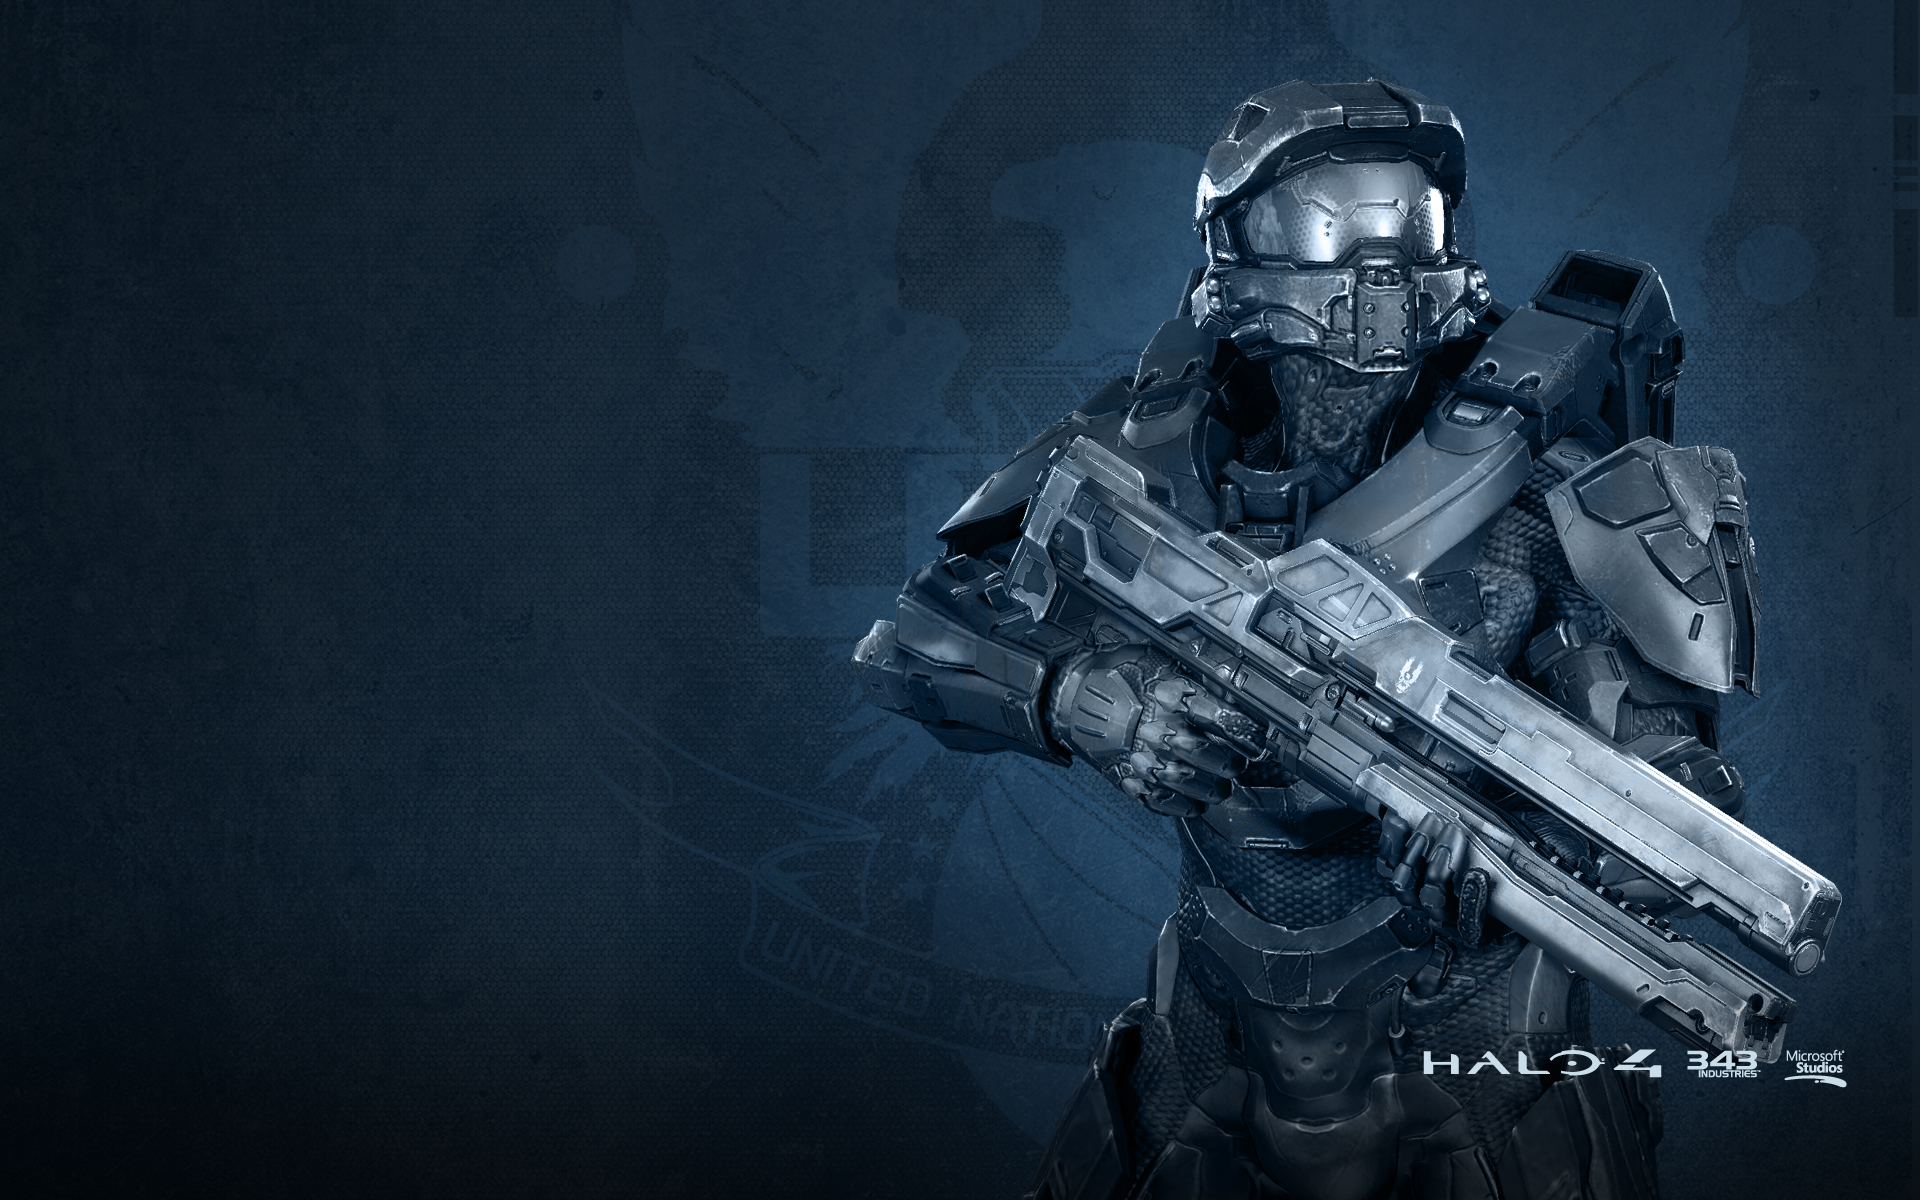 6 Halo 4 high quality wallpapers